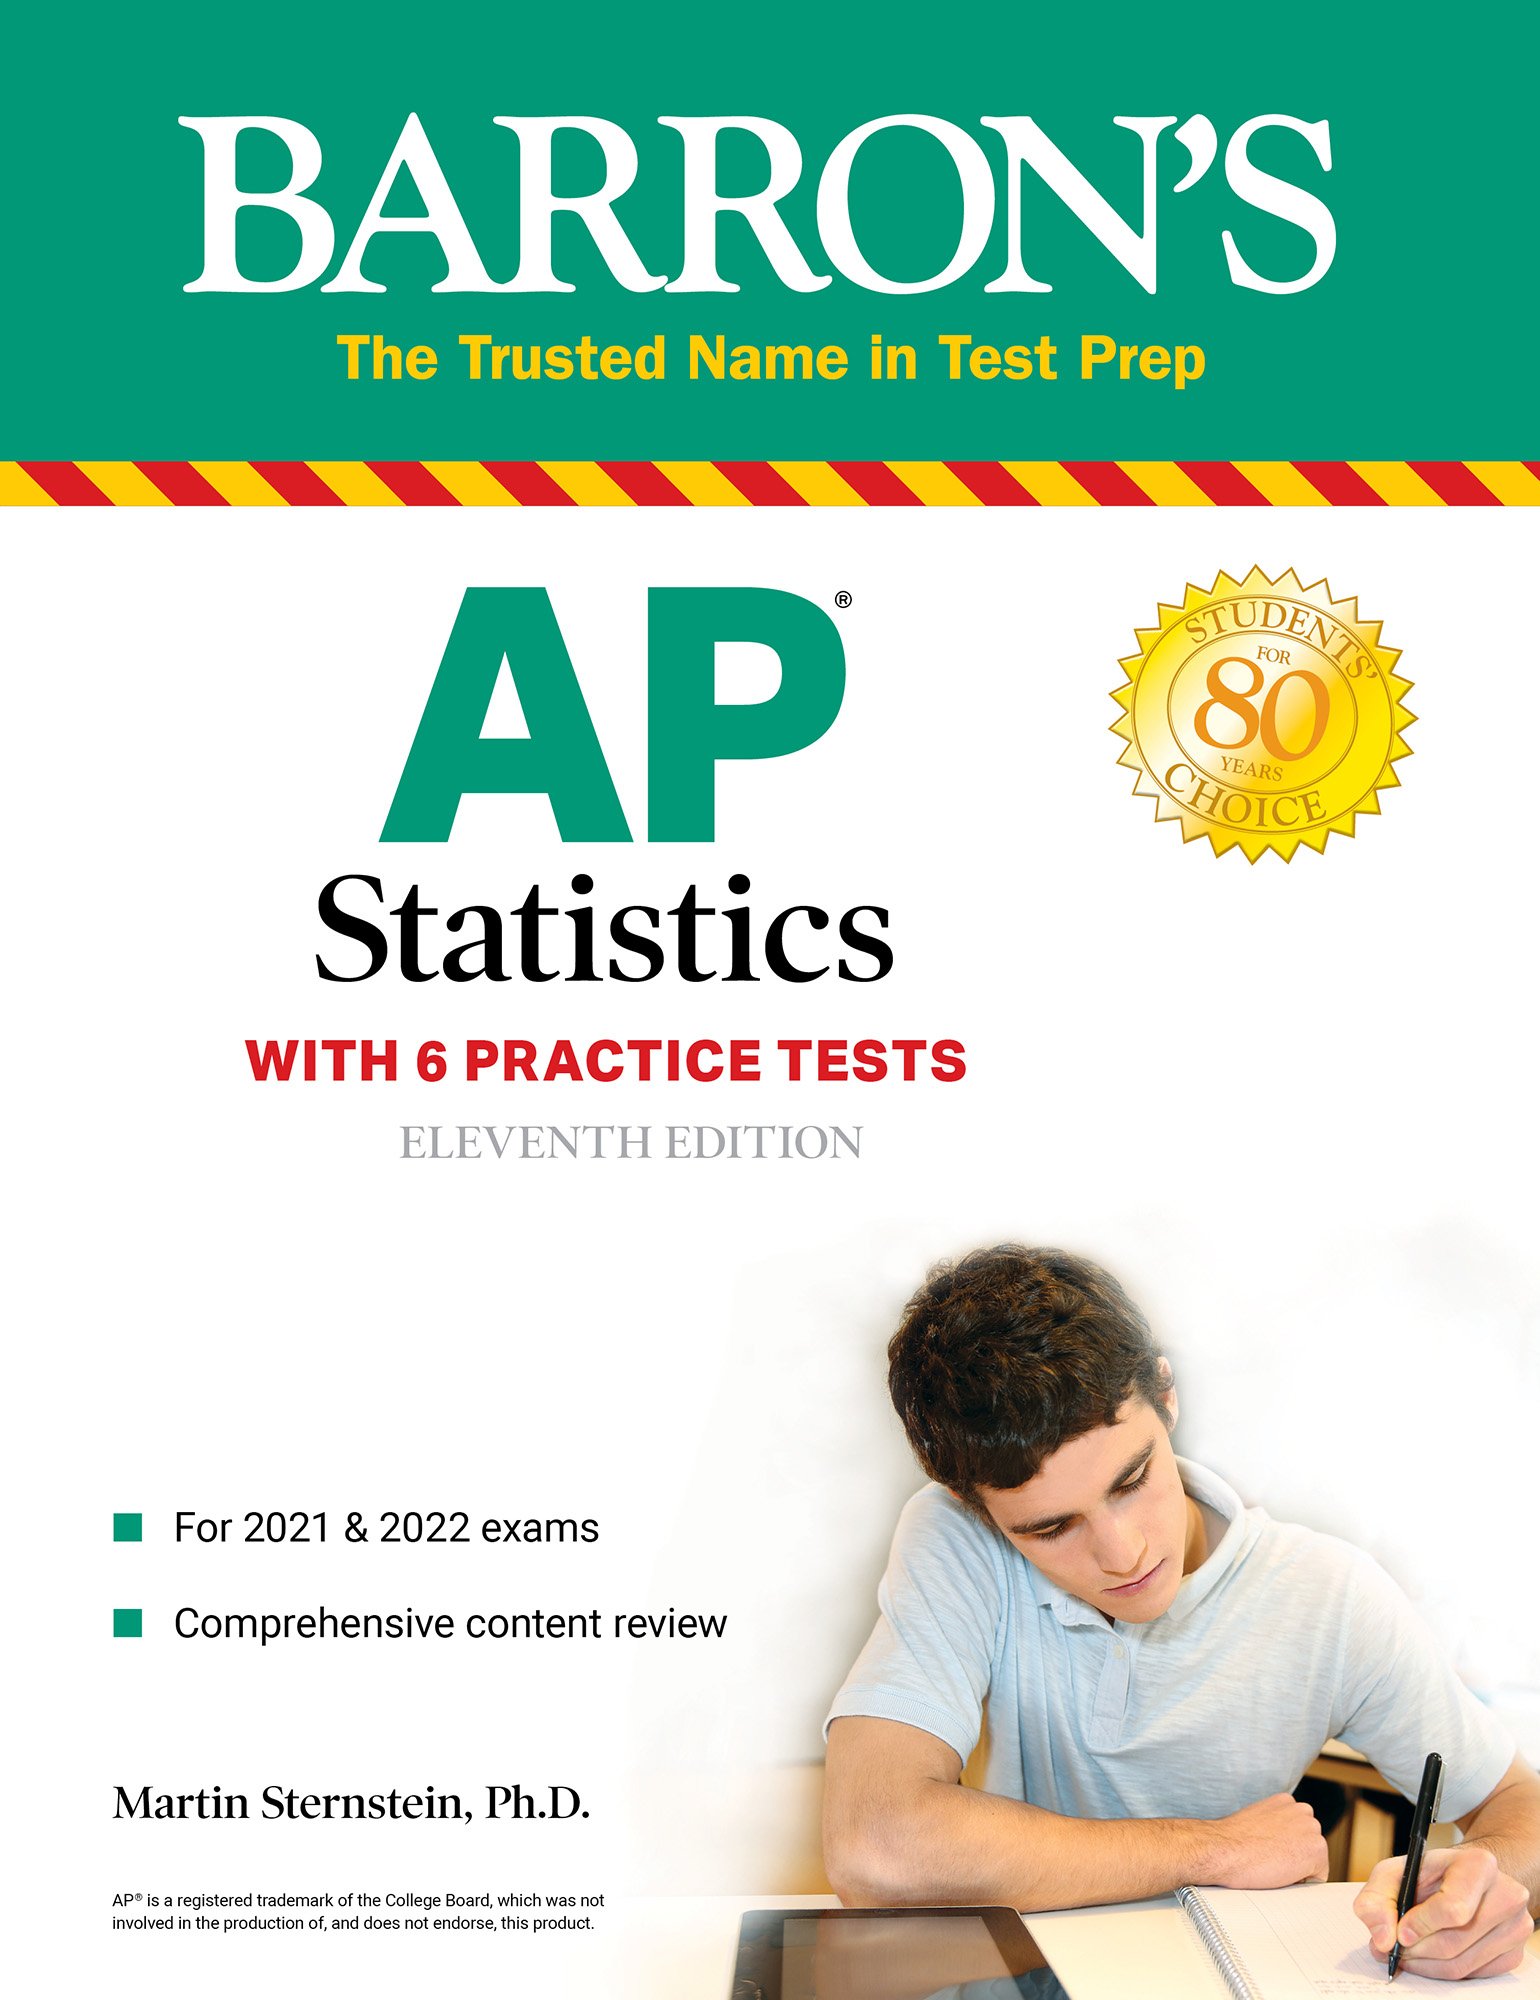 ap-statistics-with-6-practice-tests-softarchive